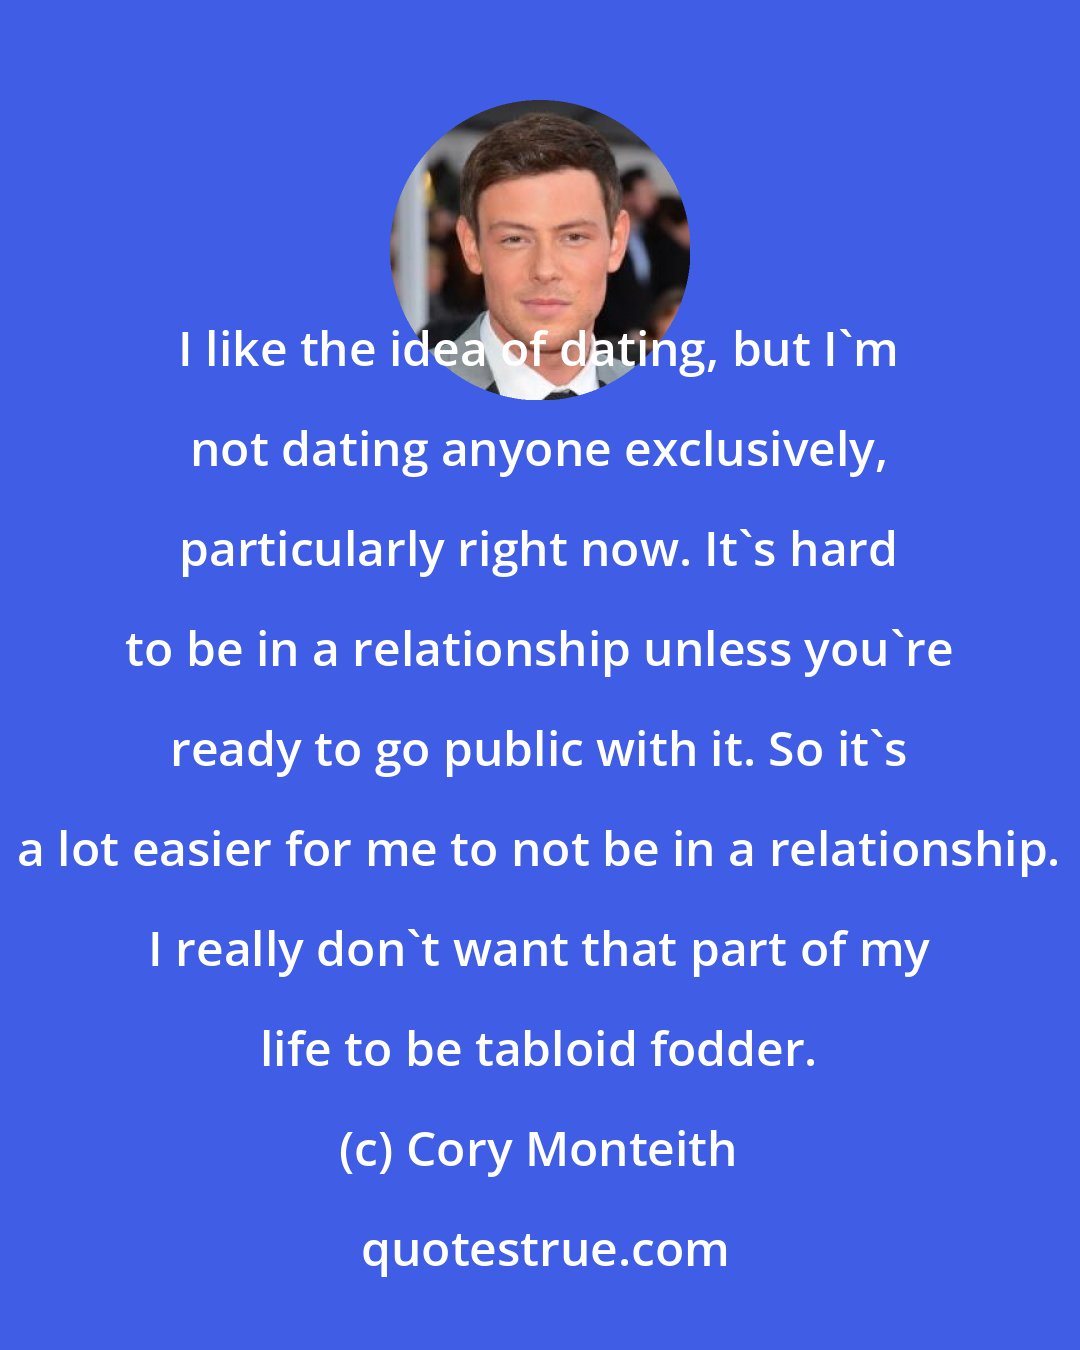 Cory Monteith: I like the idea of dating, but I'm not dating anyone exclusively, particularly right now. It's hard to be in a relationship unless you're ready to go public with it. So it's a lot easier for me to not be in a relationship. I really don't want that part of my life to be tabloid fodder.